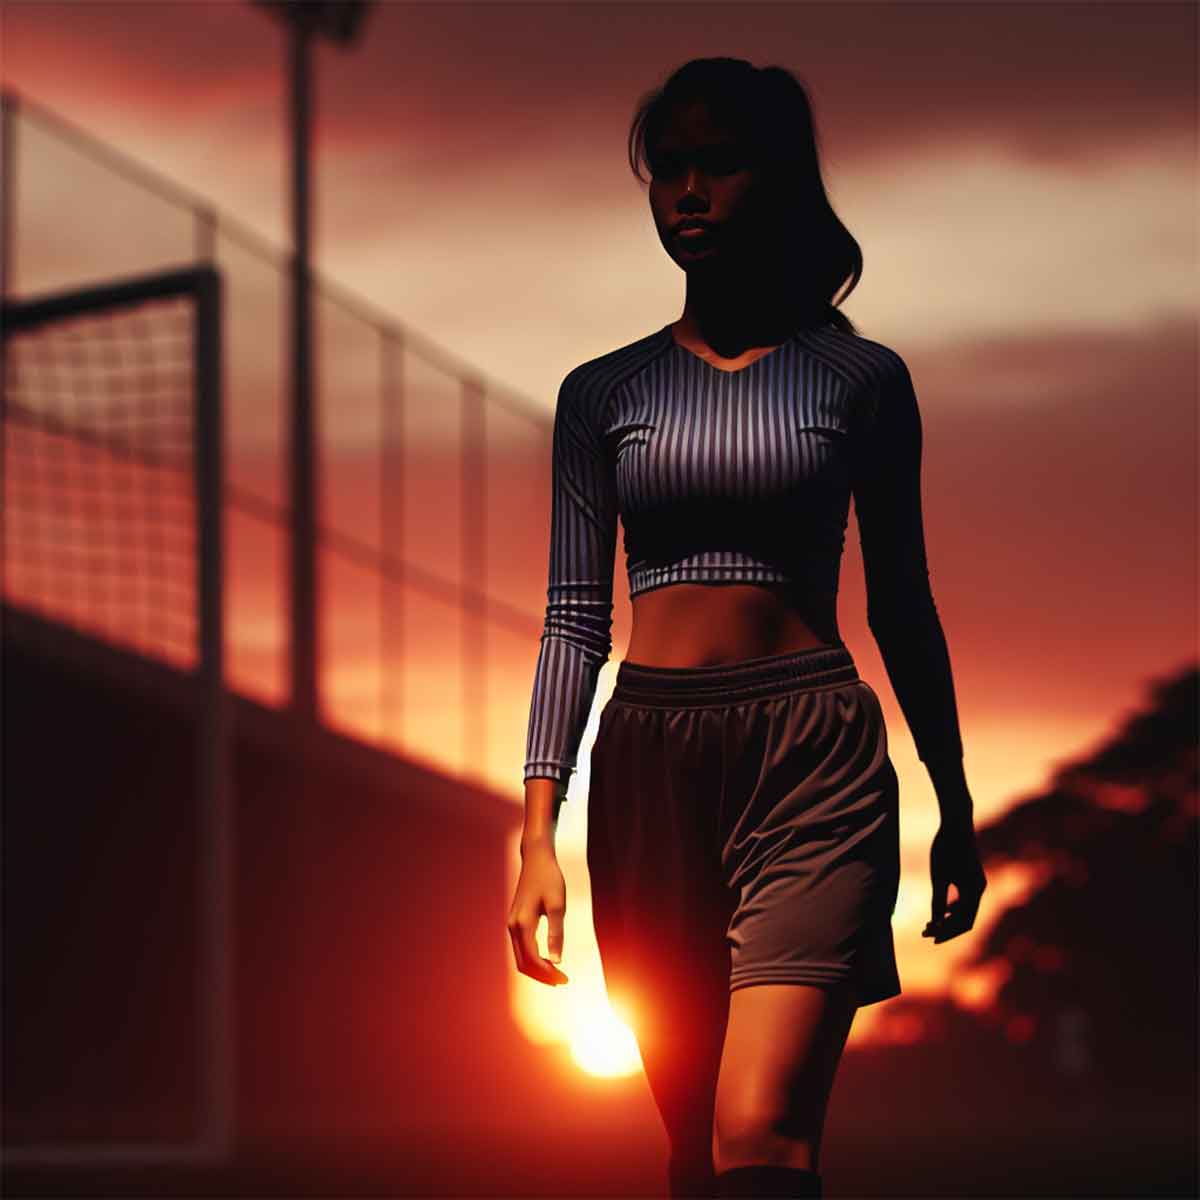 Silhouette of a female soccer player geared up with performance-supportive undergarments, ready to take on the match.